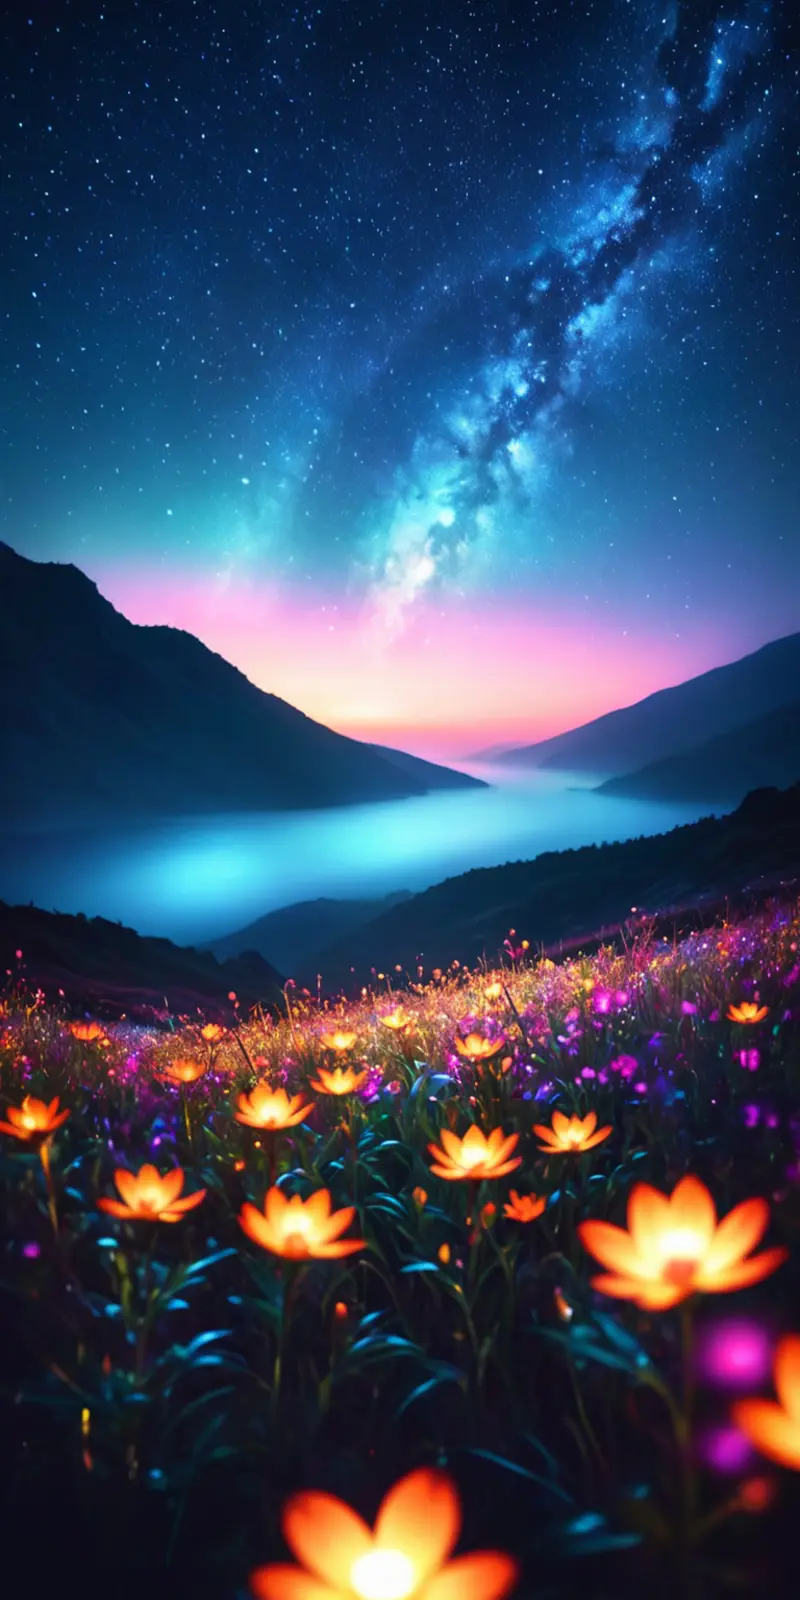 A dazzling night scene where a luminous Milky Way stretches across the sky above a valley filled with misty water. The foreground is dominated by bright orange and purple flowers that glow against the darker shades of foliage. The distant mountains are silhouetted against a gradient of sunset hues transitioning into the starry expanse above.